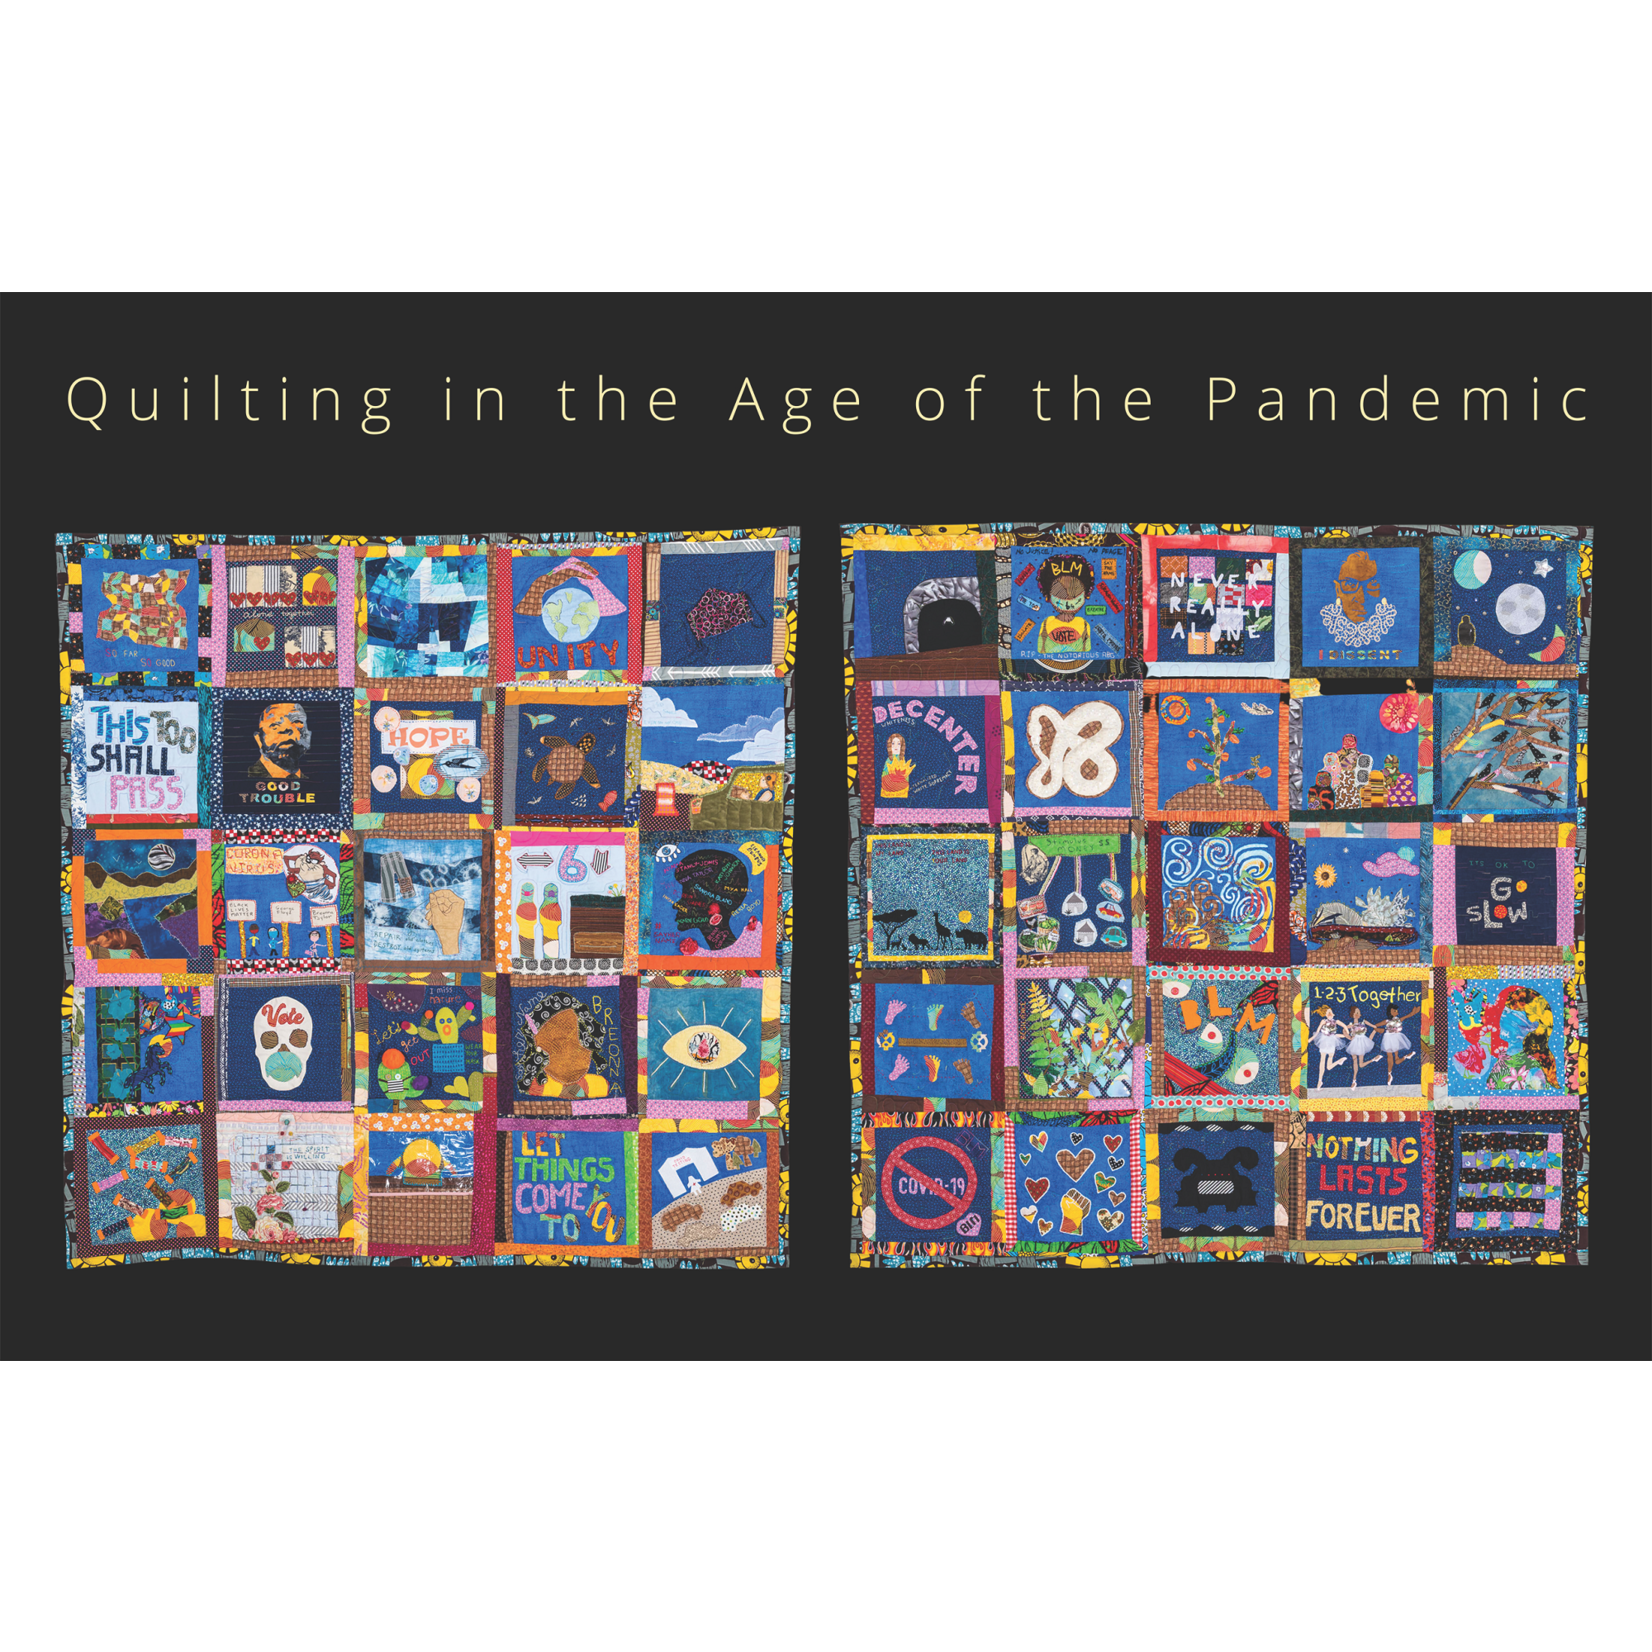 Quilting in the Age of the Pandemic